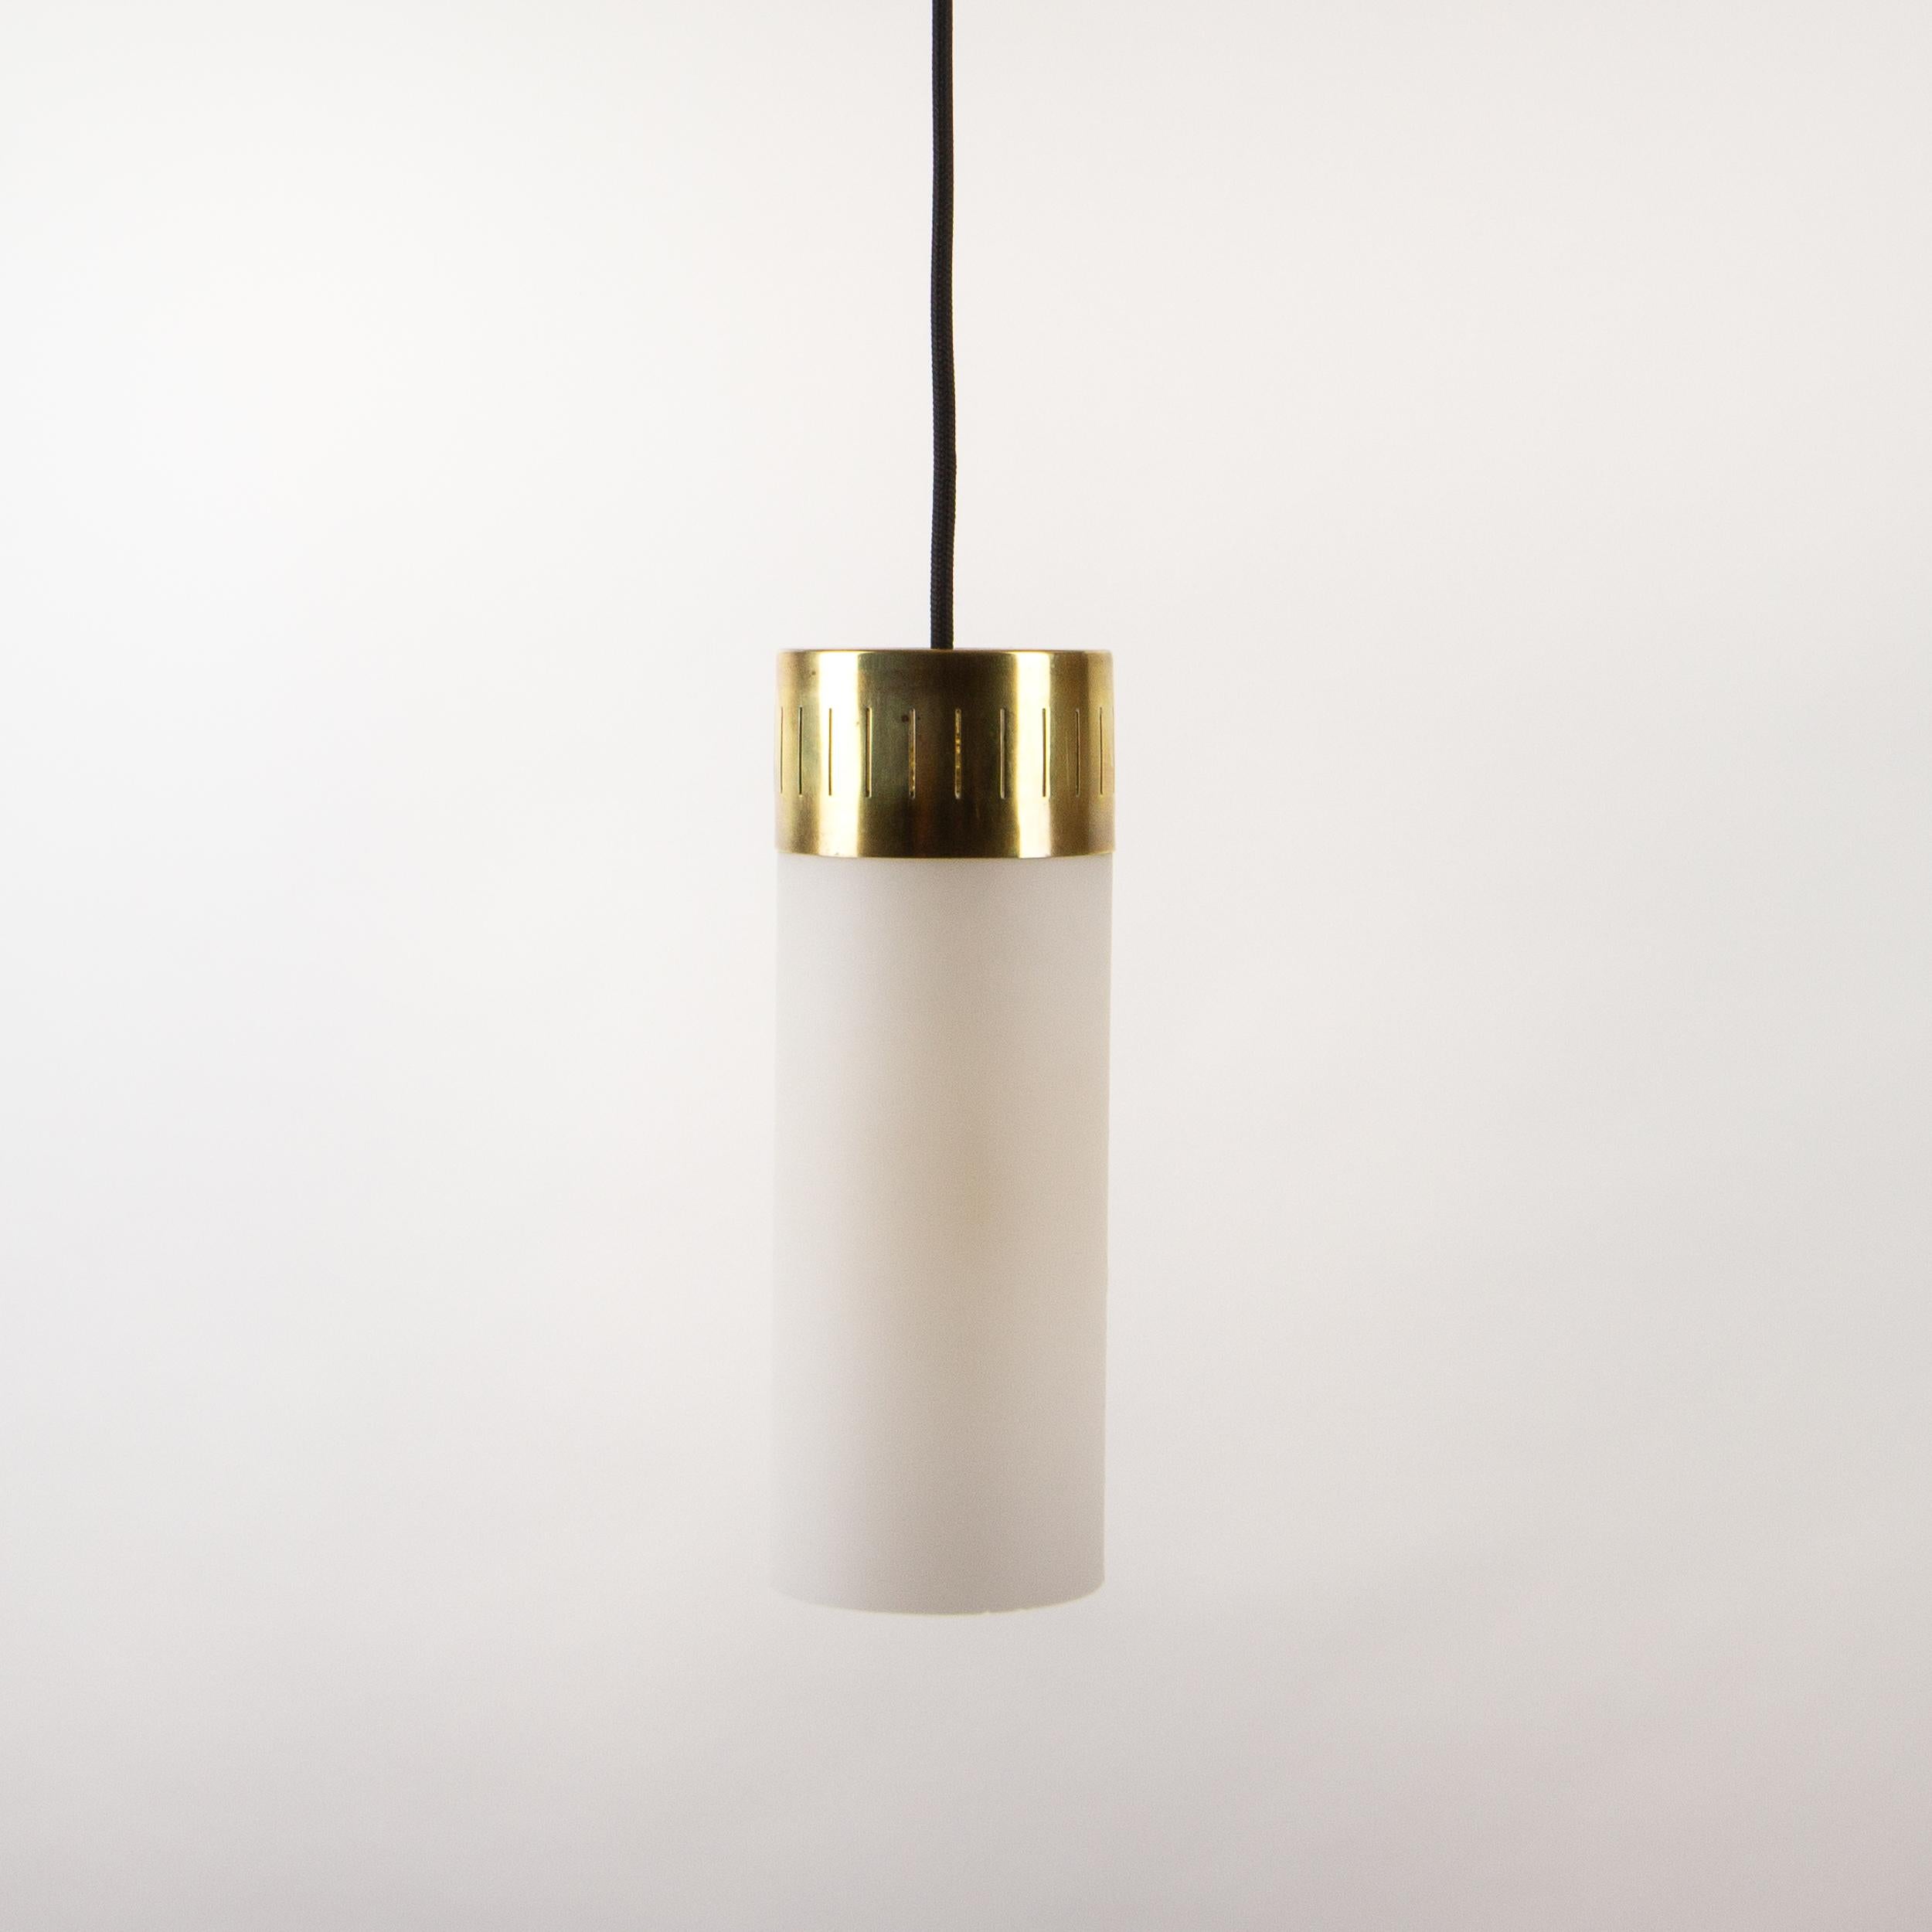 Italian brass and opaque glass tubular hanging pendant lights. Imported from Italy during the 1940s for an Italian restaurant on the Kent coast, the owners couldn’t find the style they wanted in the U.K. so went back to Italy for all the furnishings